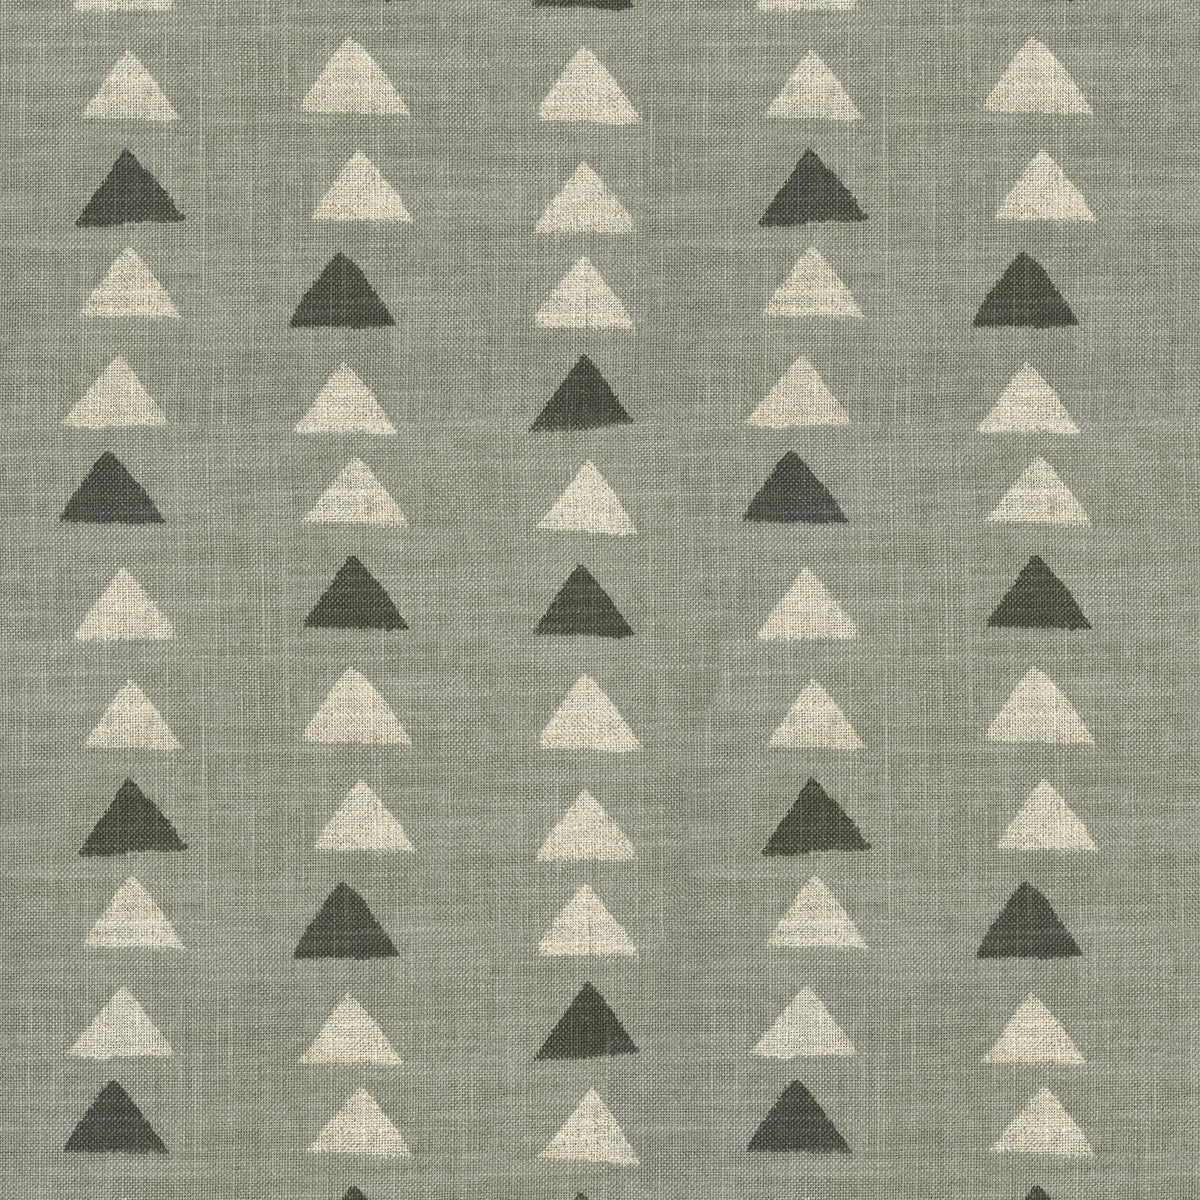 P/K Lifestyles Nomadic Triangle - Sterling 408457 Fabric Swatch